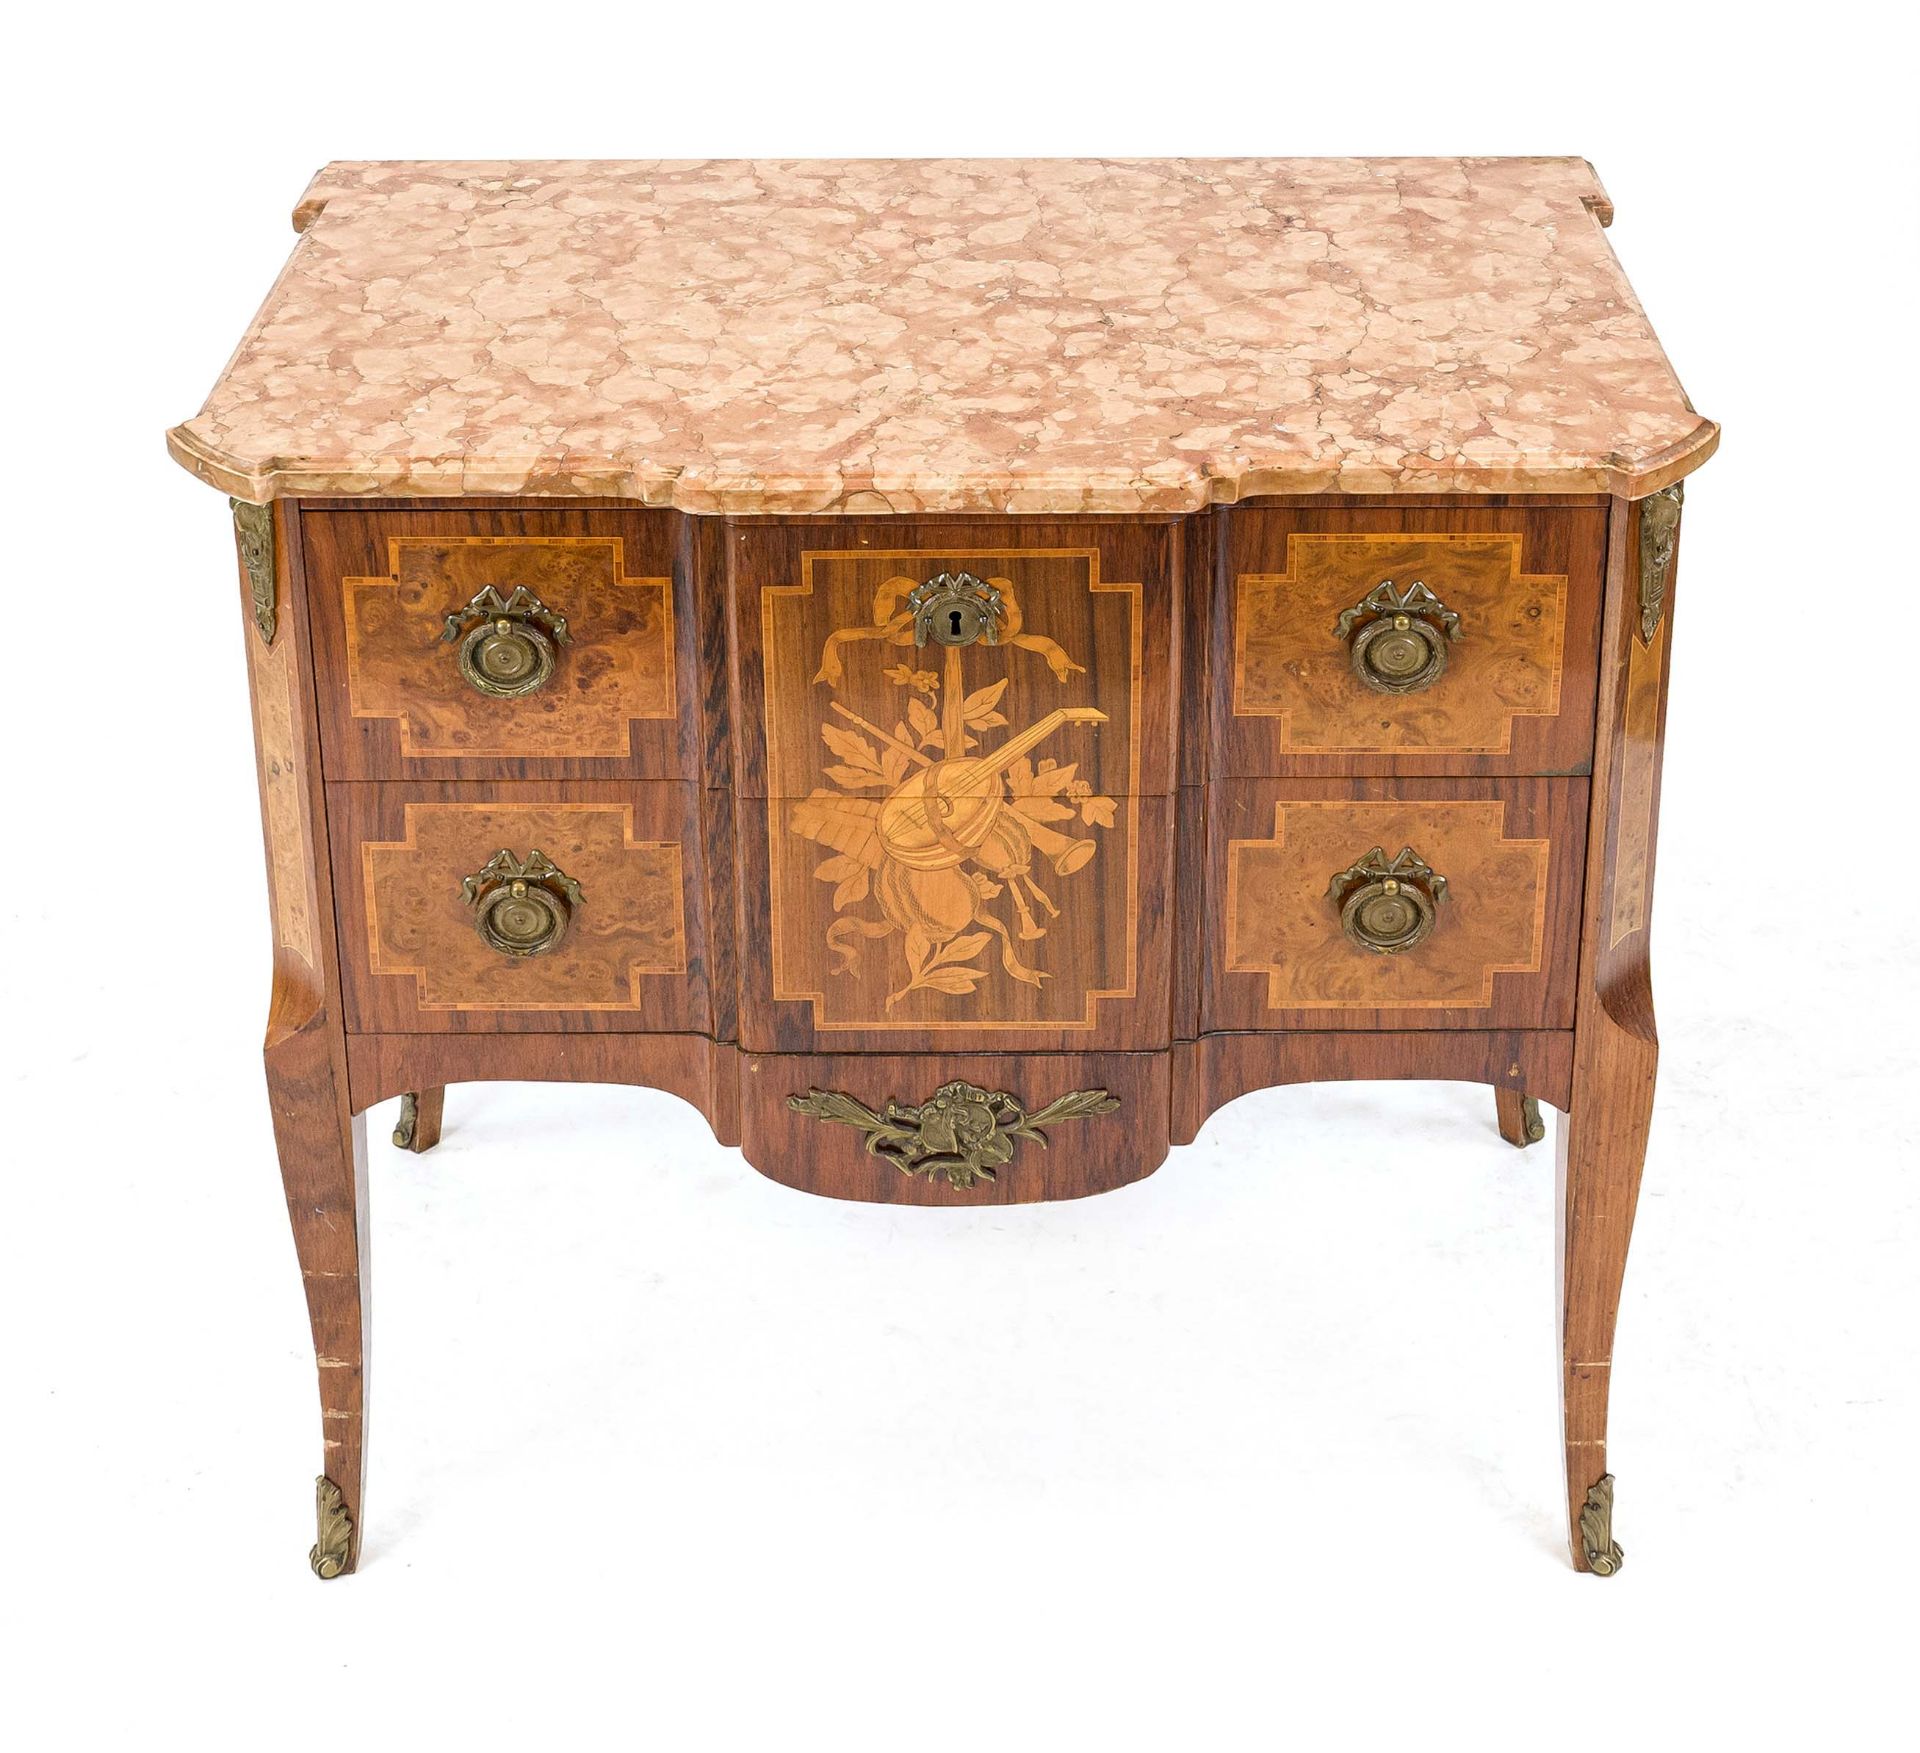 Classicist-style chest of drawers, 20th century, walnut and other precious woods, rose-colored stone